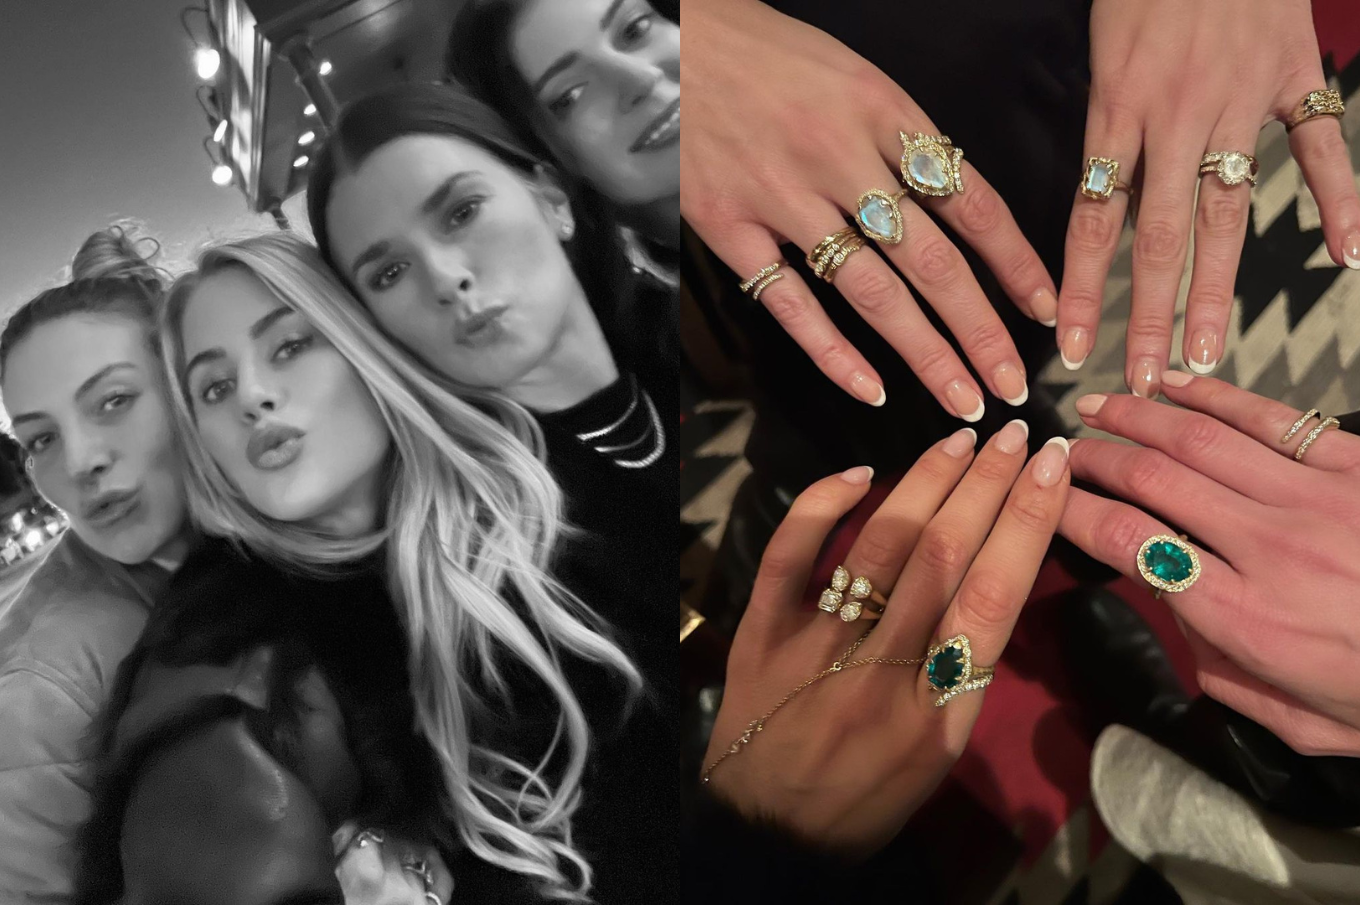 Left Image: Selfie of Logan and 3 girls, Right Image: 4 hands together with LH rings on